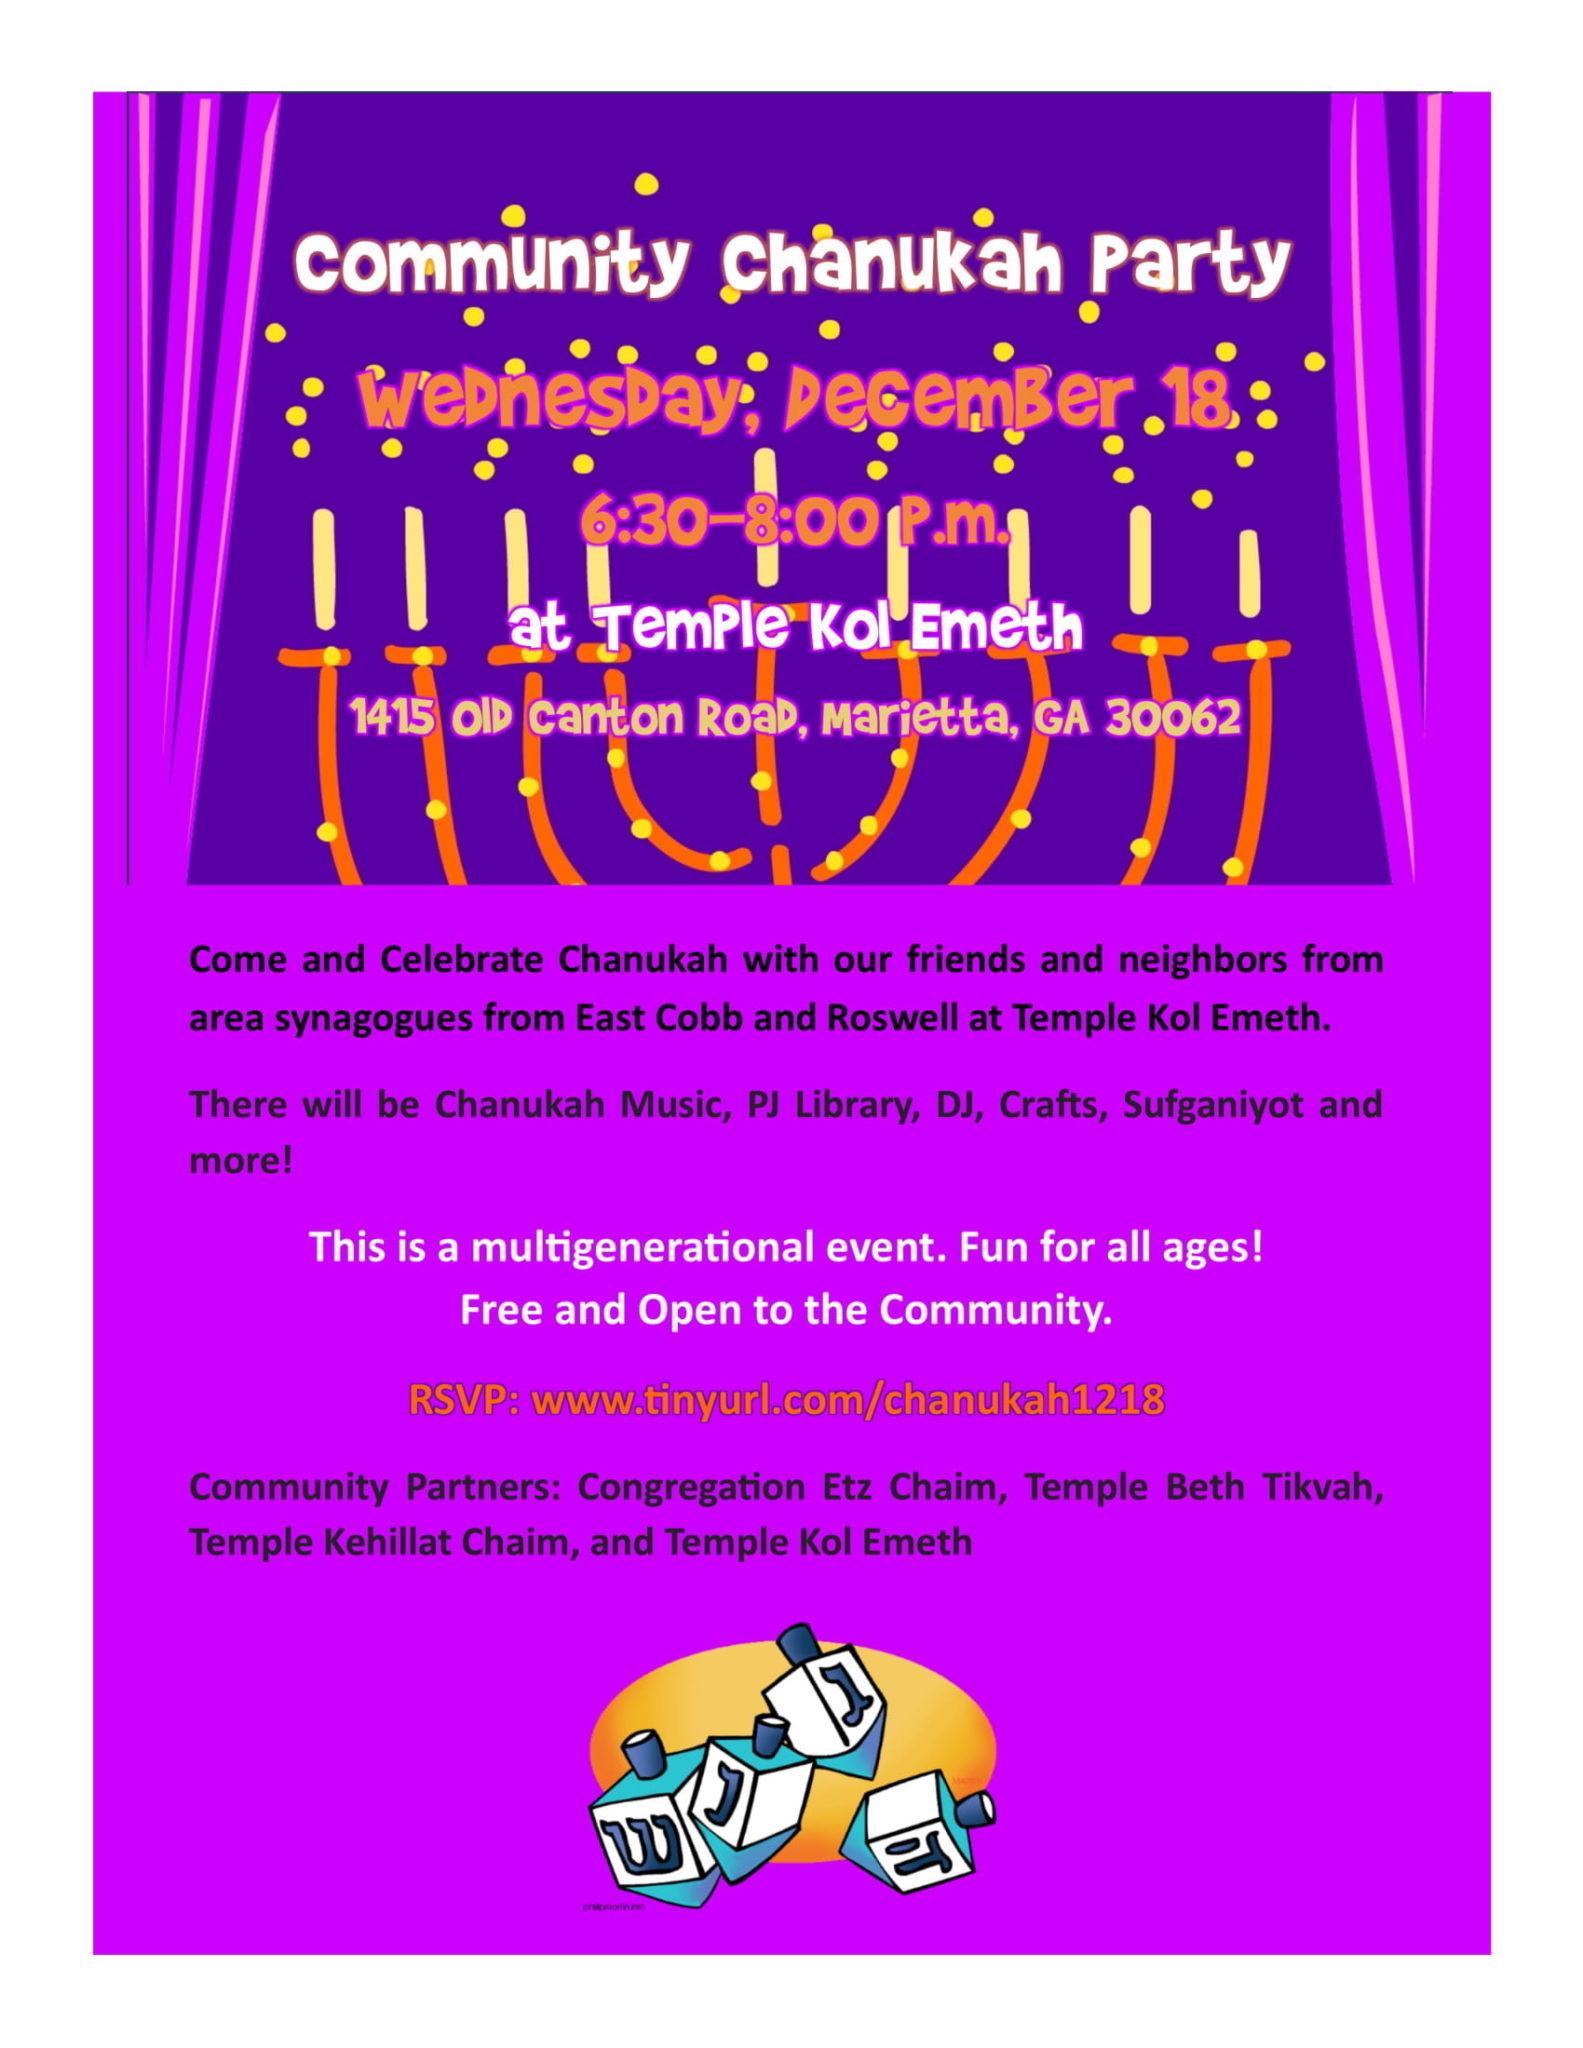 East Cobb and Roswell Community Chanukah Celebration